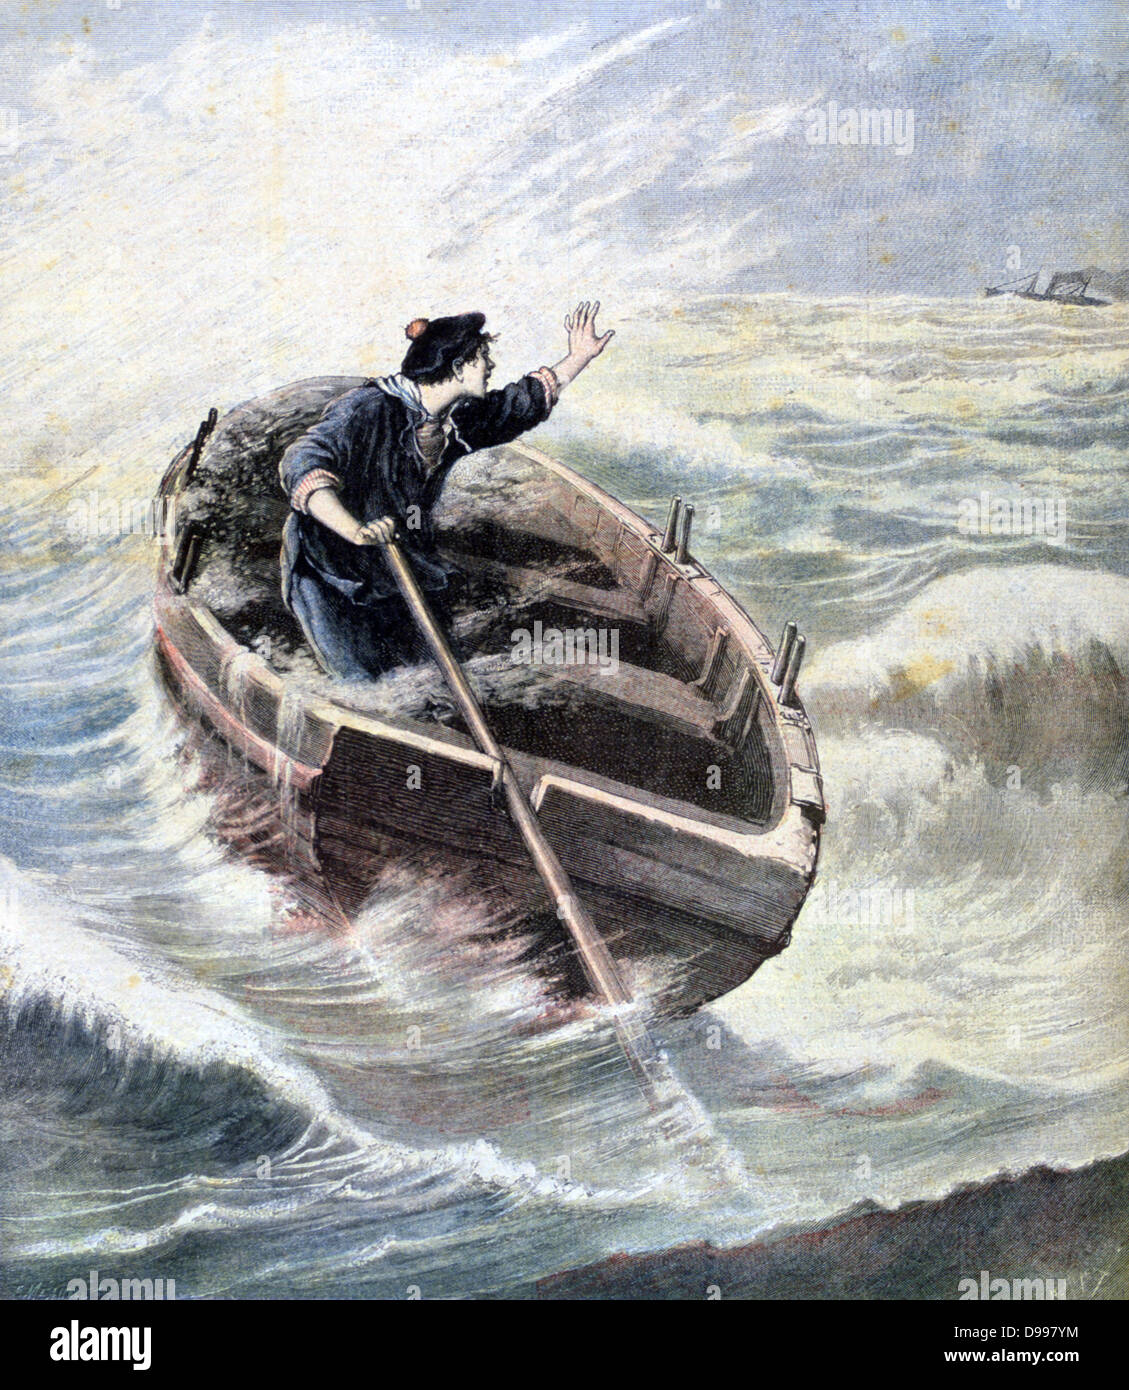 Lost at Sea:  14-year old Manuel Thomas, his father drowned, adrift in small rowing boat.  Saved about 20 miles off Alicante, Spain, by merchanti ship 'Euryanthe'. From 'Le Petit Journal', Paris, 3 January 1891. Weather, Wind, Wave Stock Photo